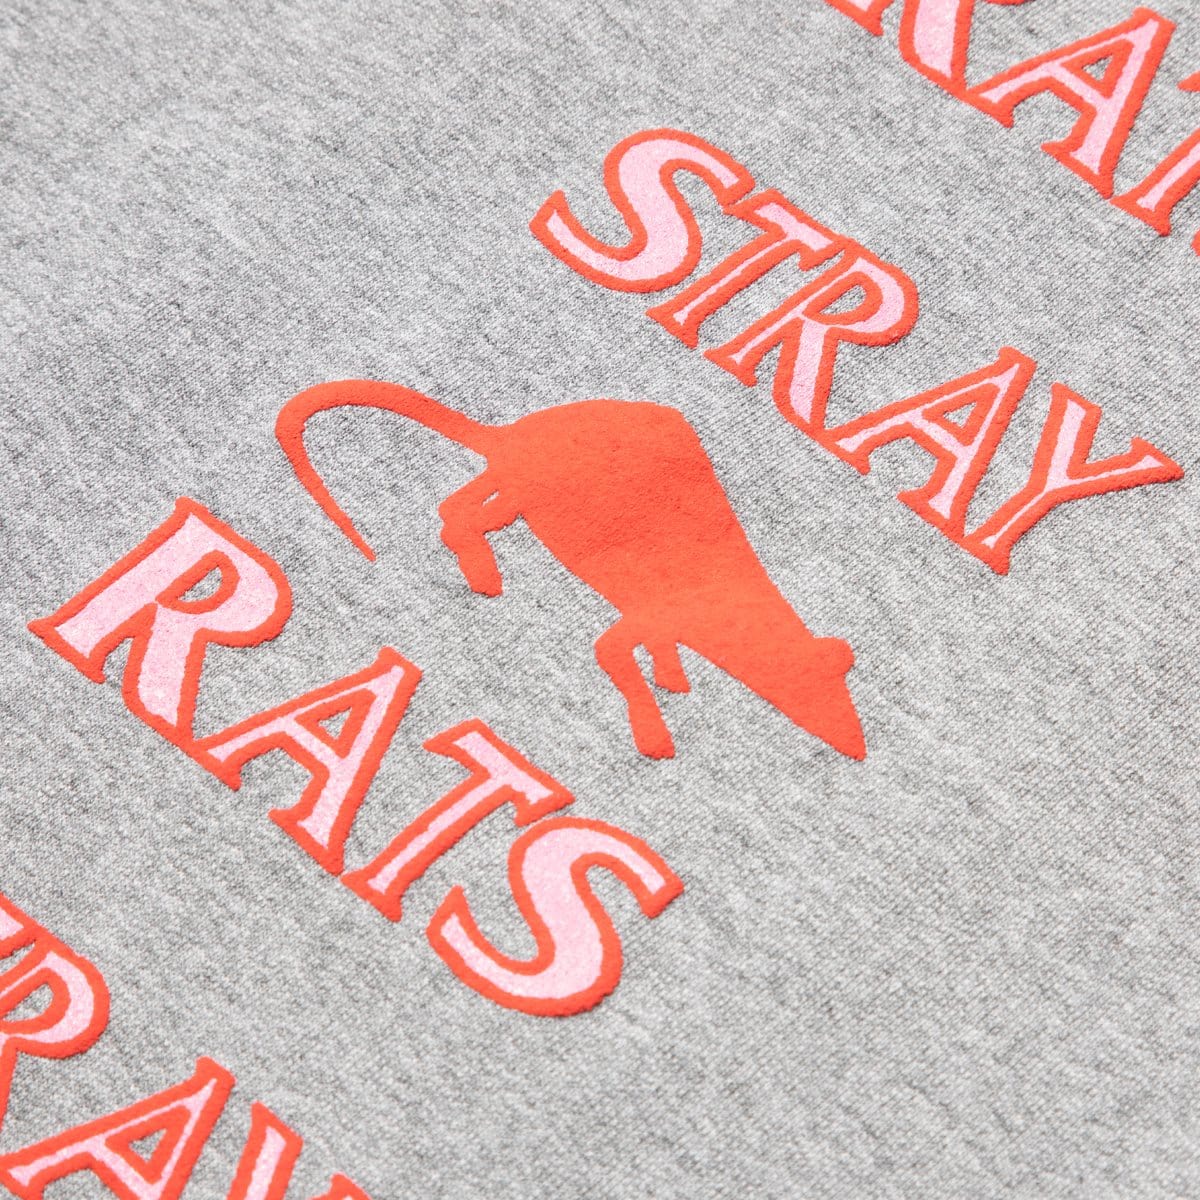 Stray Rats Bottoms RODENTICIDE SWEATPANTS